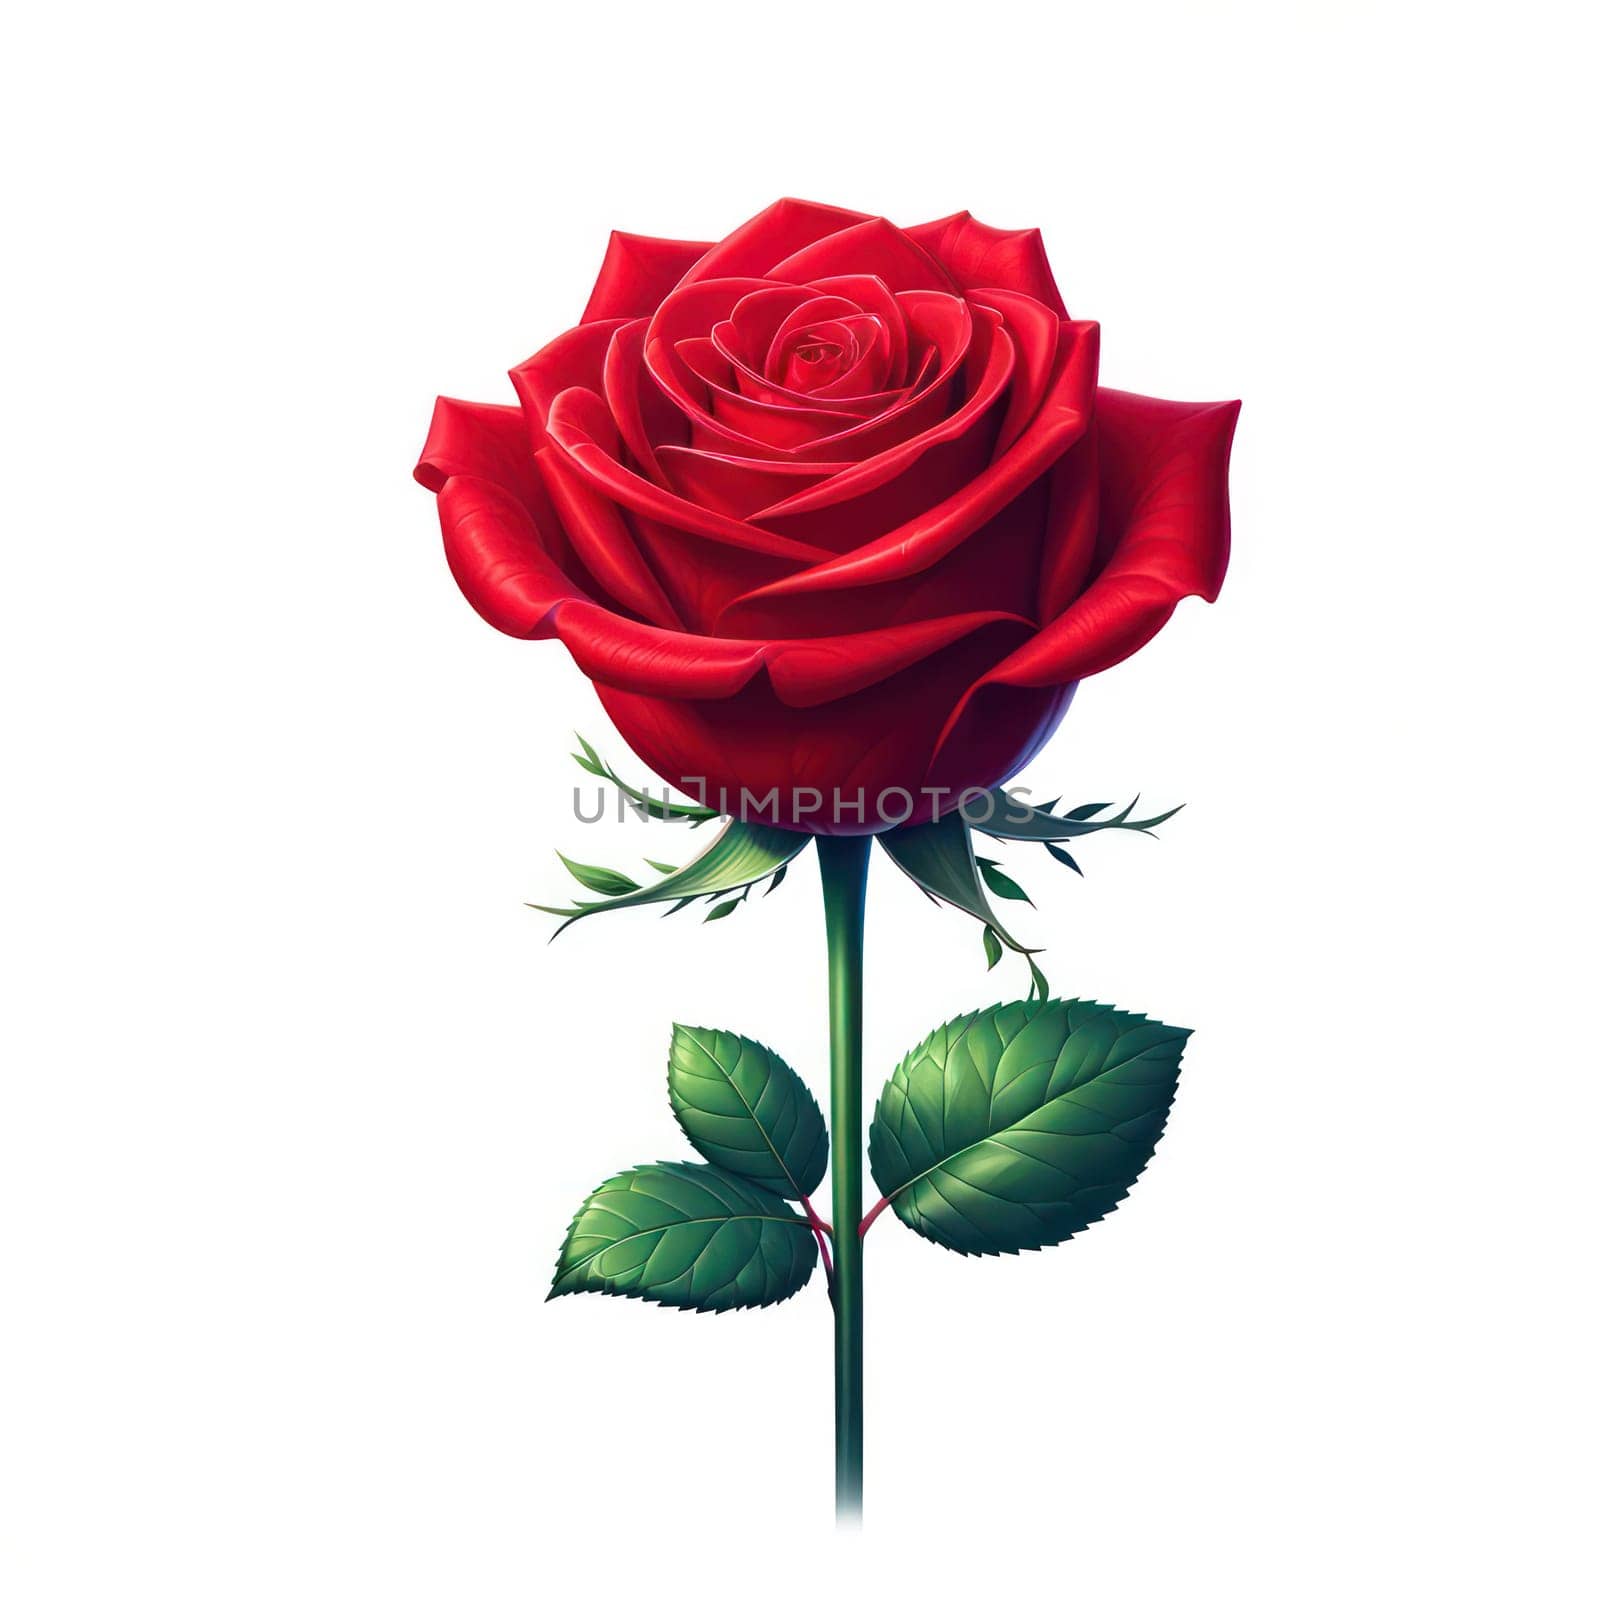 Vivid Red Rose with Soft Petals and Green Leaf, Symbol of Love and Beauty.